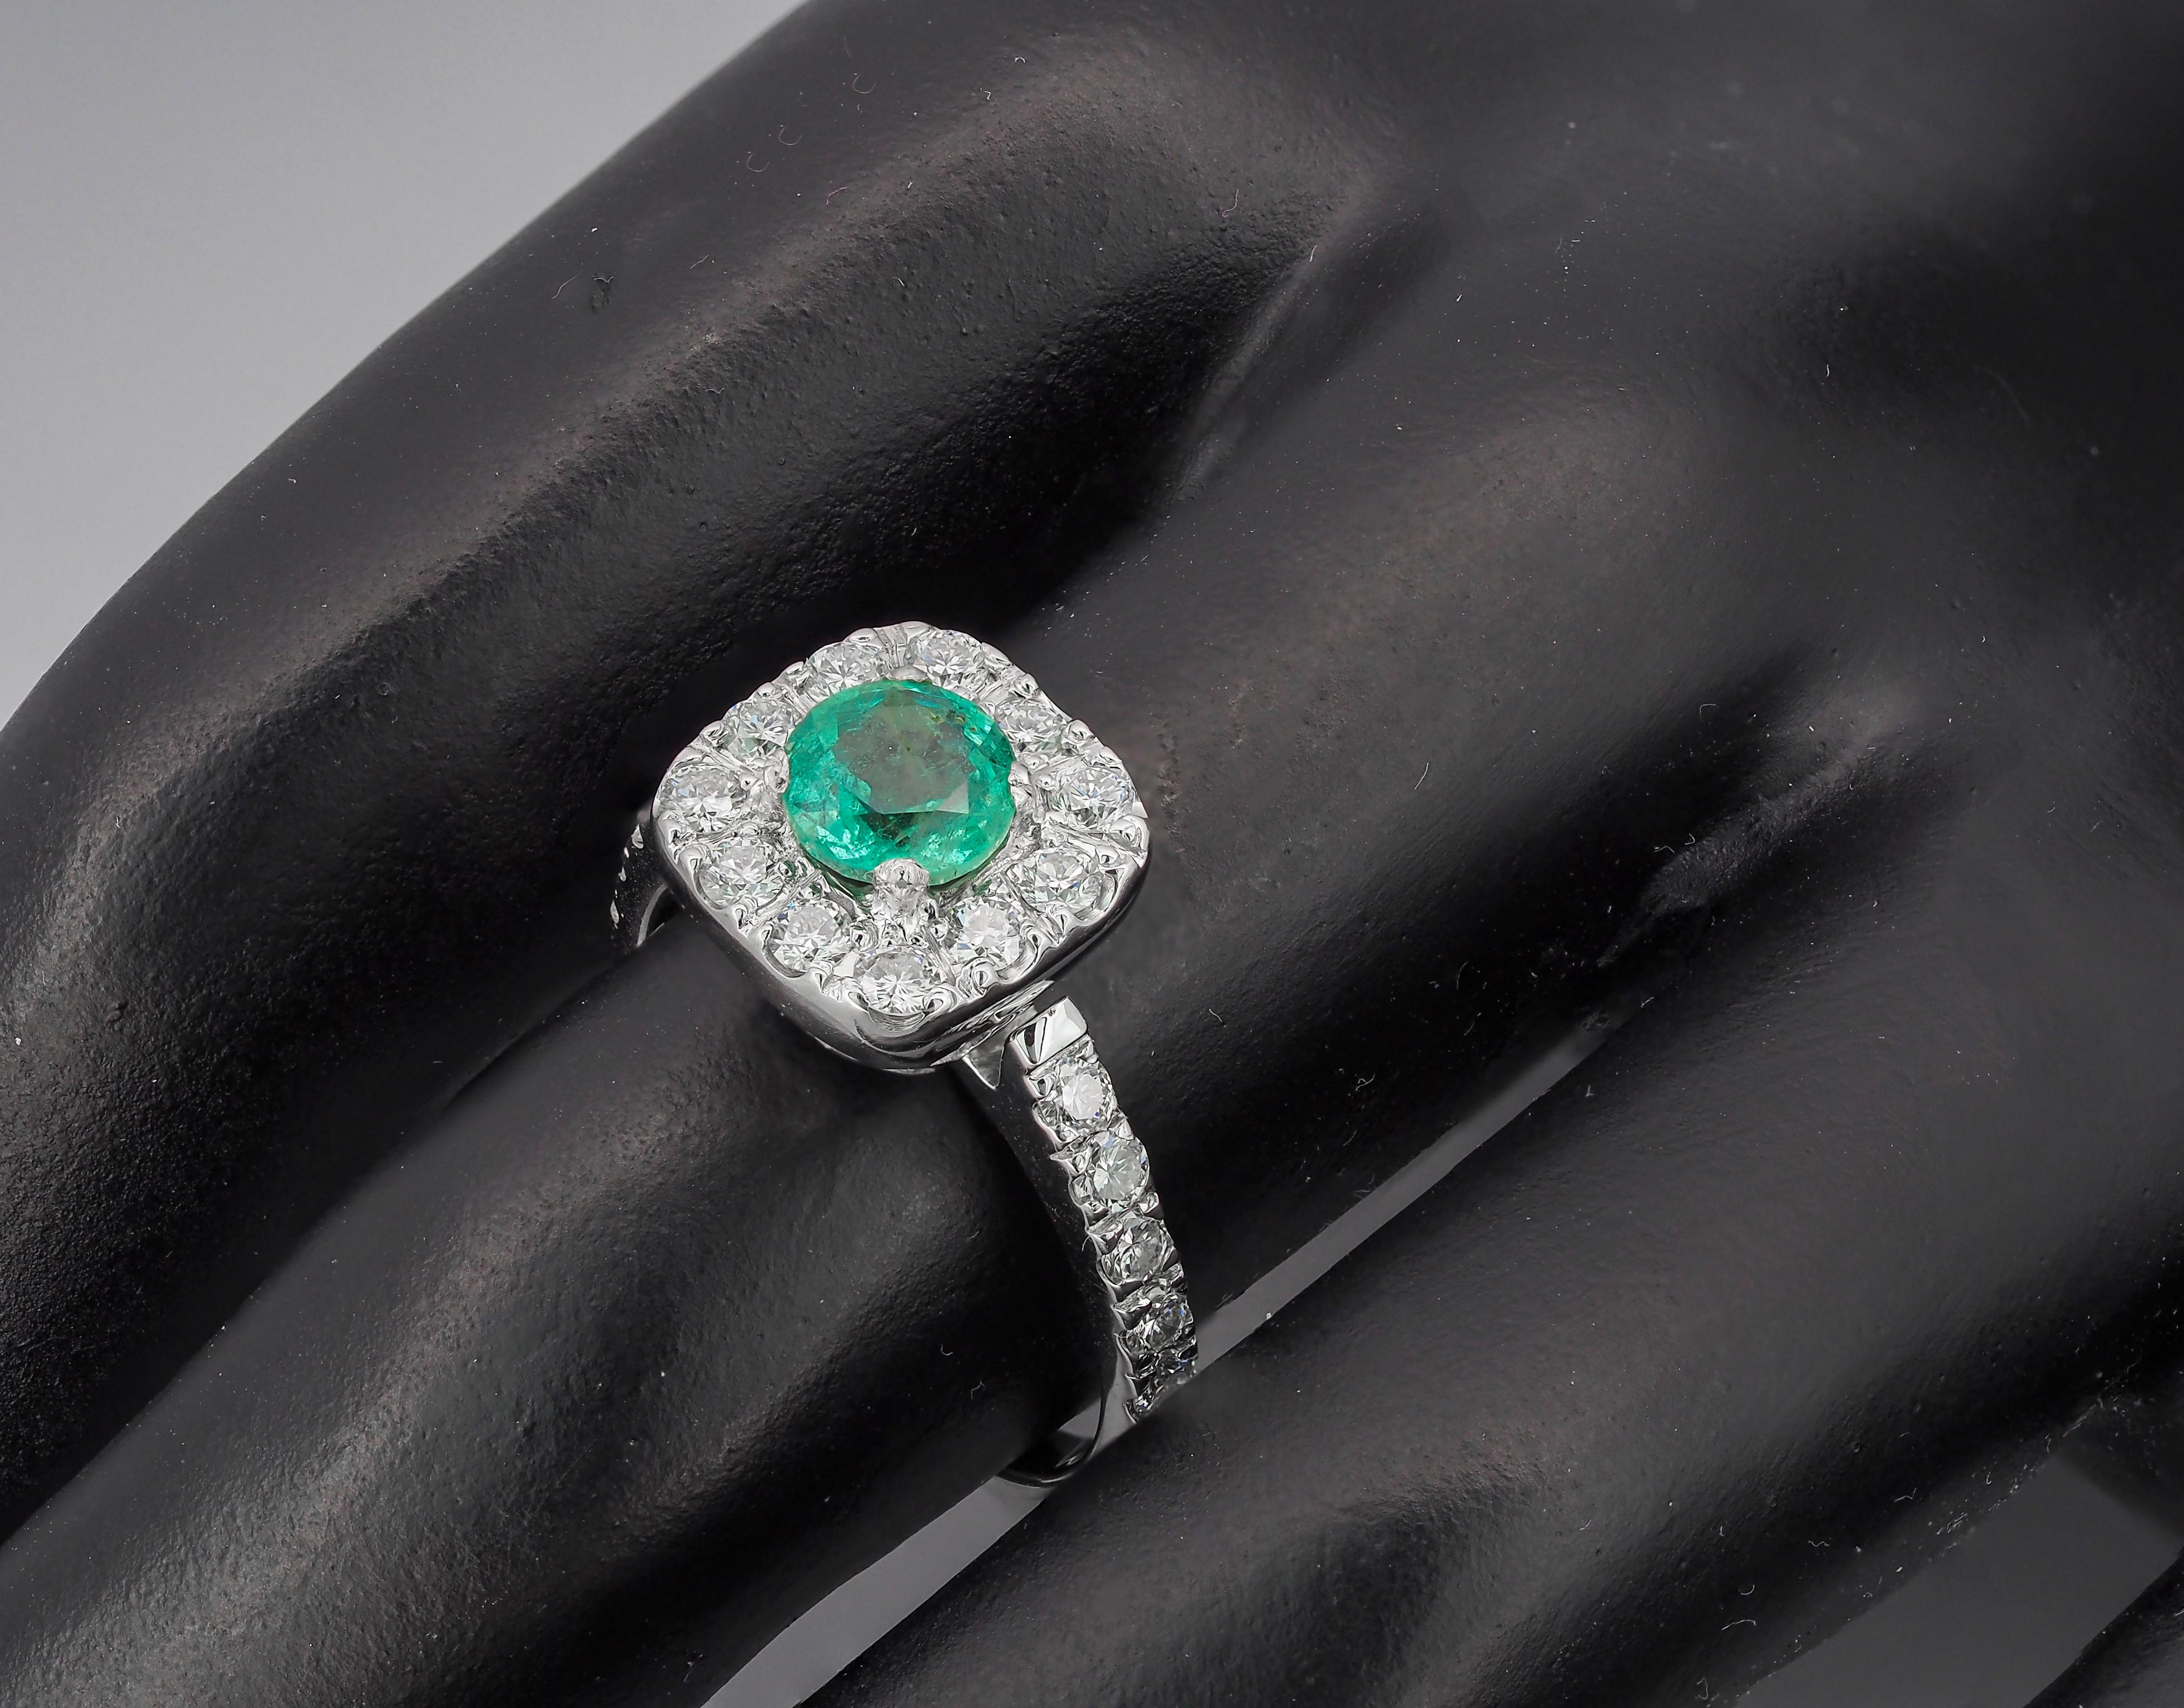 For Sale:  Emerald and Diamonds 14k Gold Ring, Vintage Style Emerald and Diamonds Ring 8